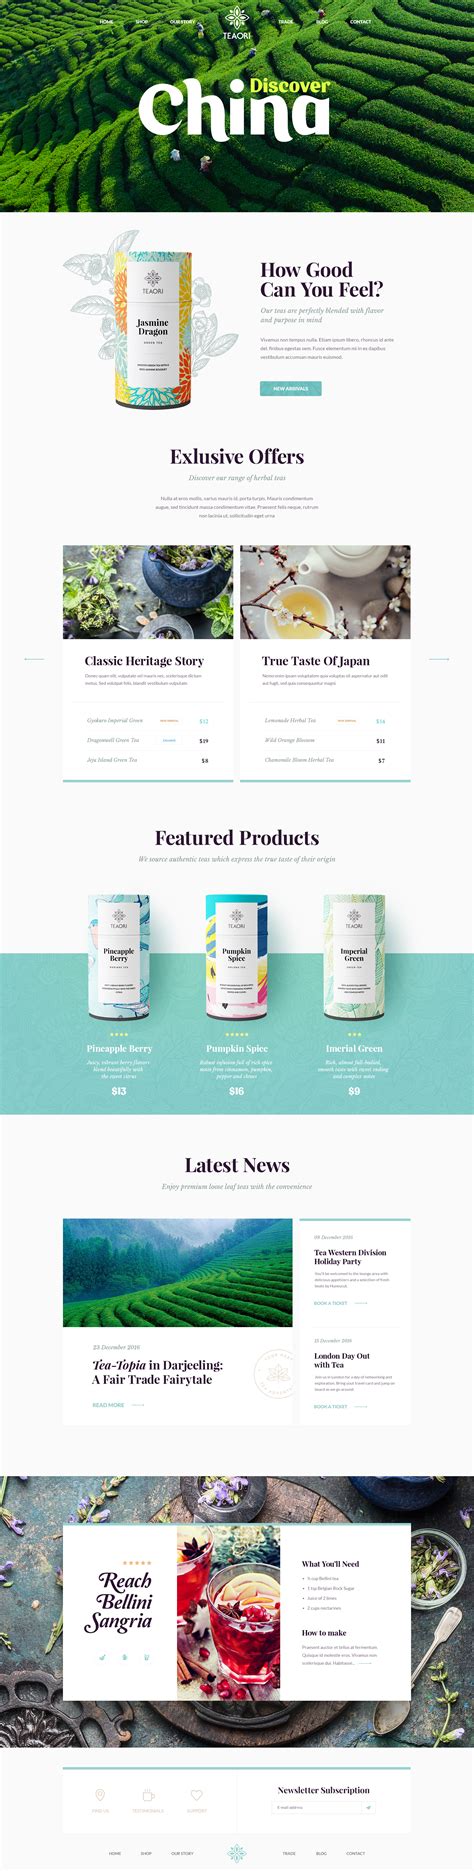 Web Design Layout Collection By Creative Mints Mediastreet